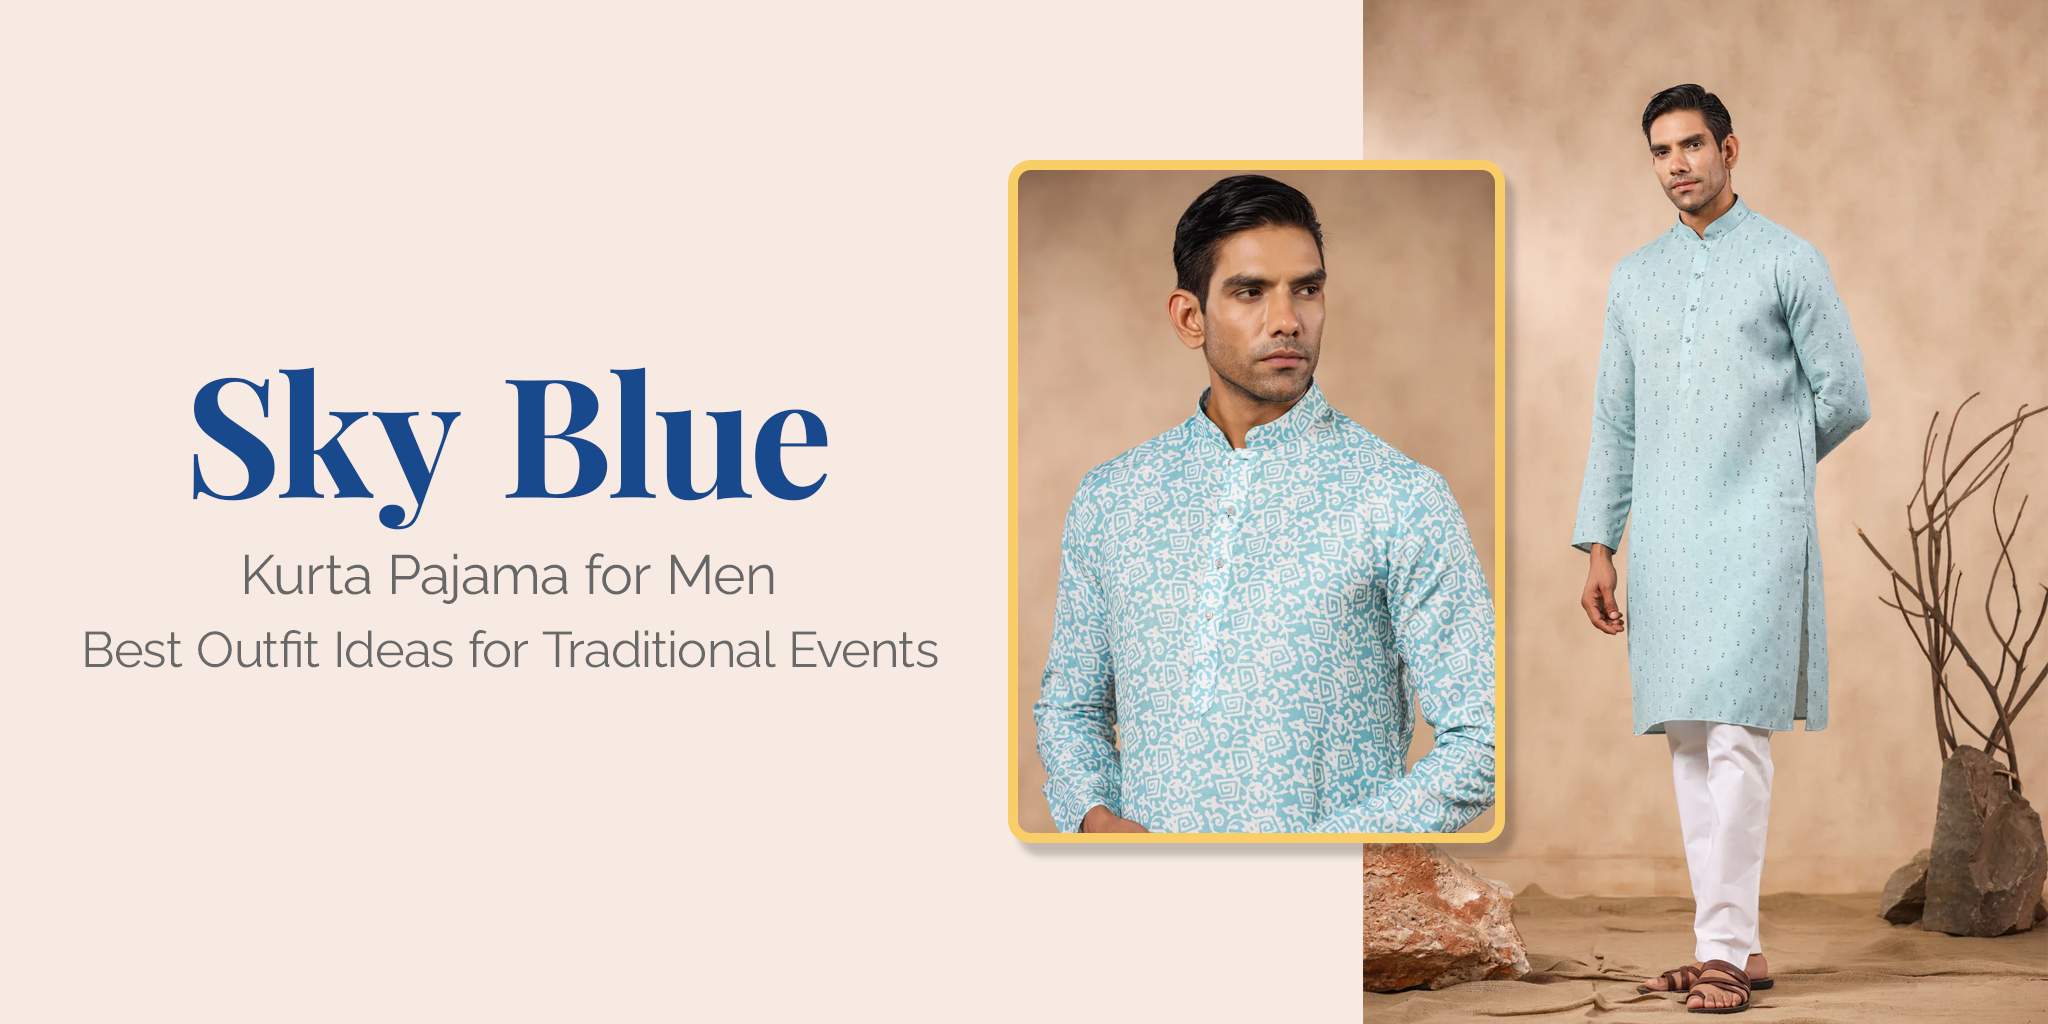 Sky Blue Kurta Pajama for Men: Best Outfit Ideas for Traditional Events